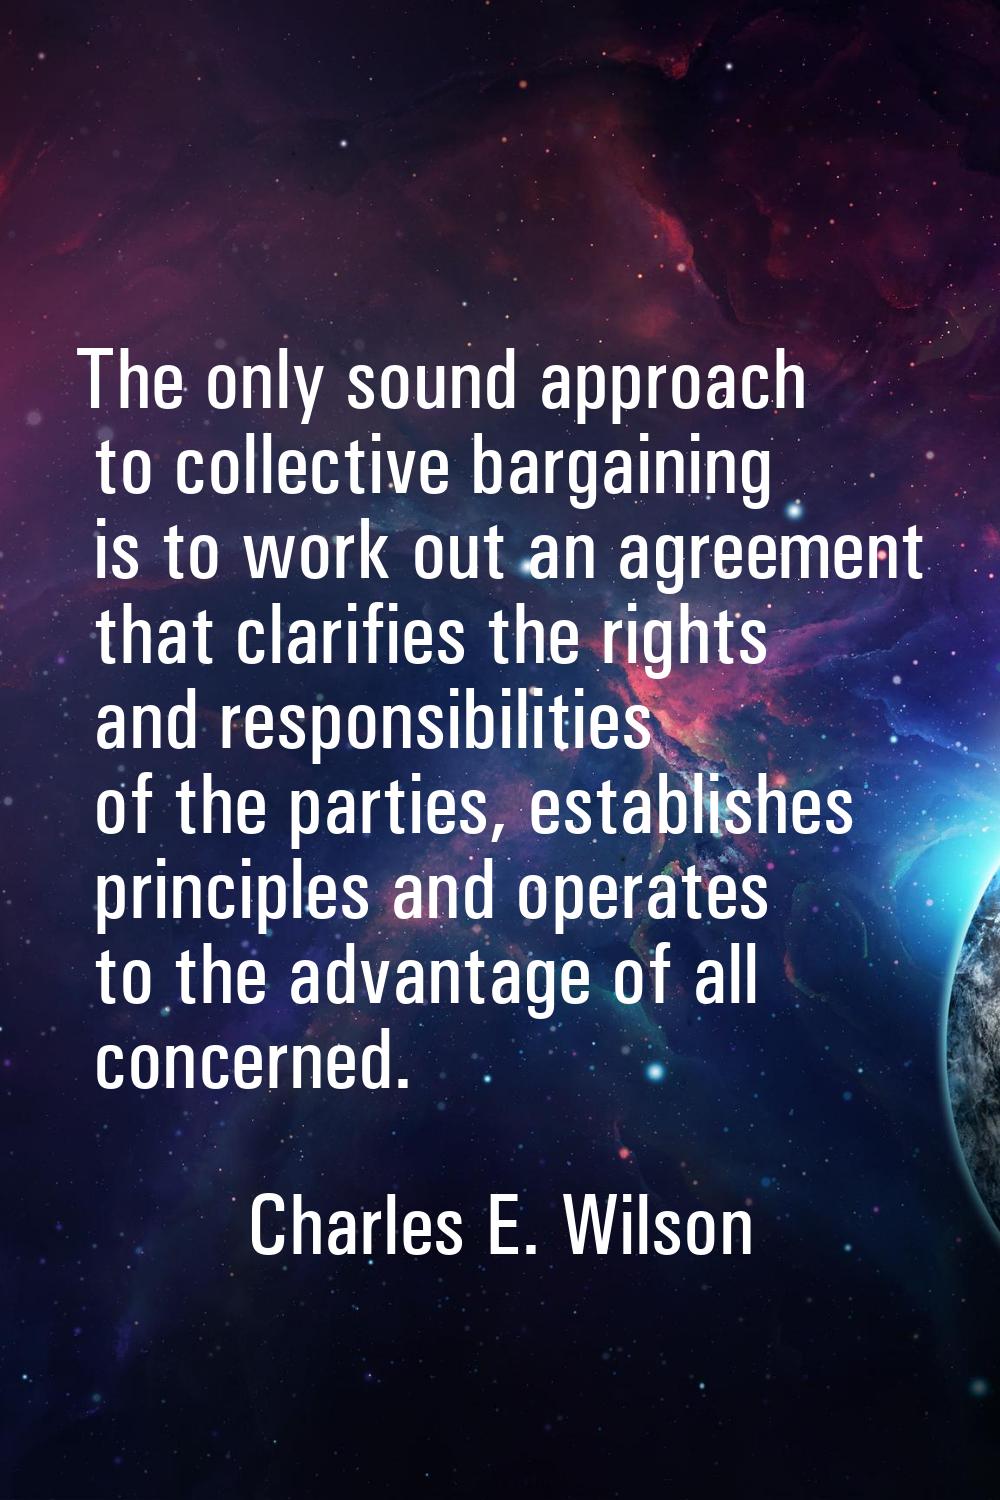 The only sound approach to collective bargaining is to work out an agreement that clarifies the rig